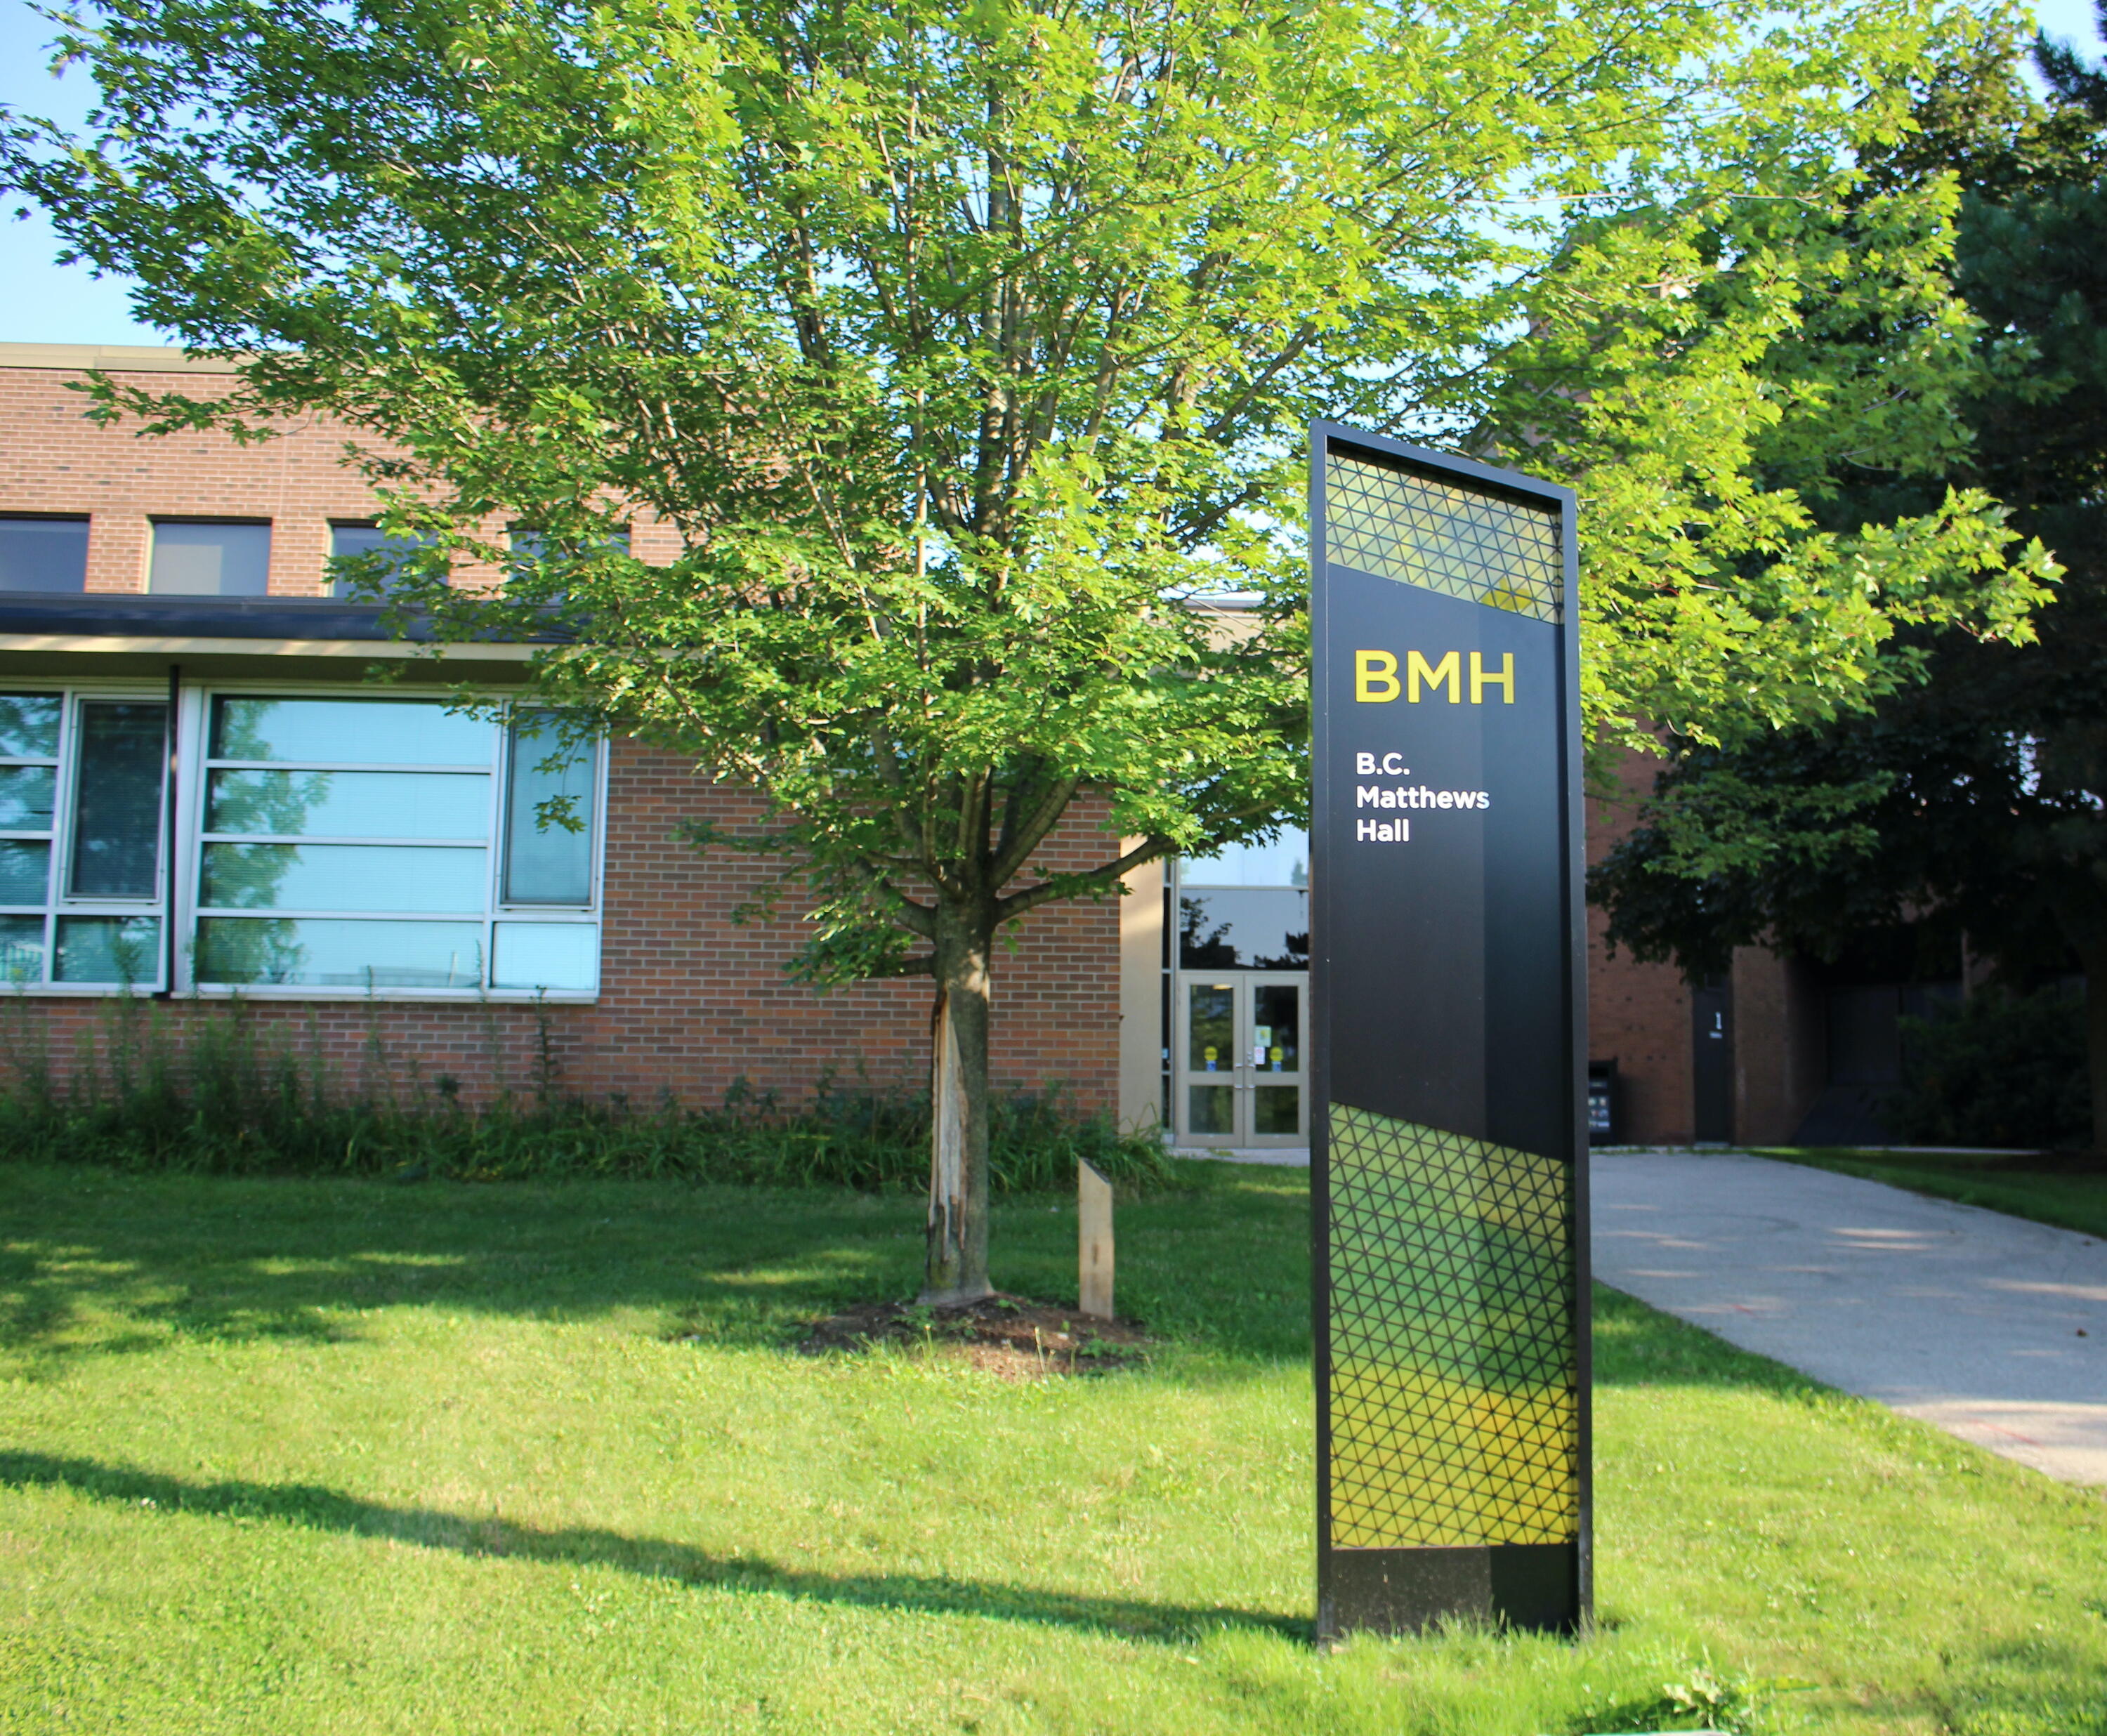 Exterior of BMH building